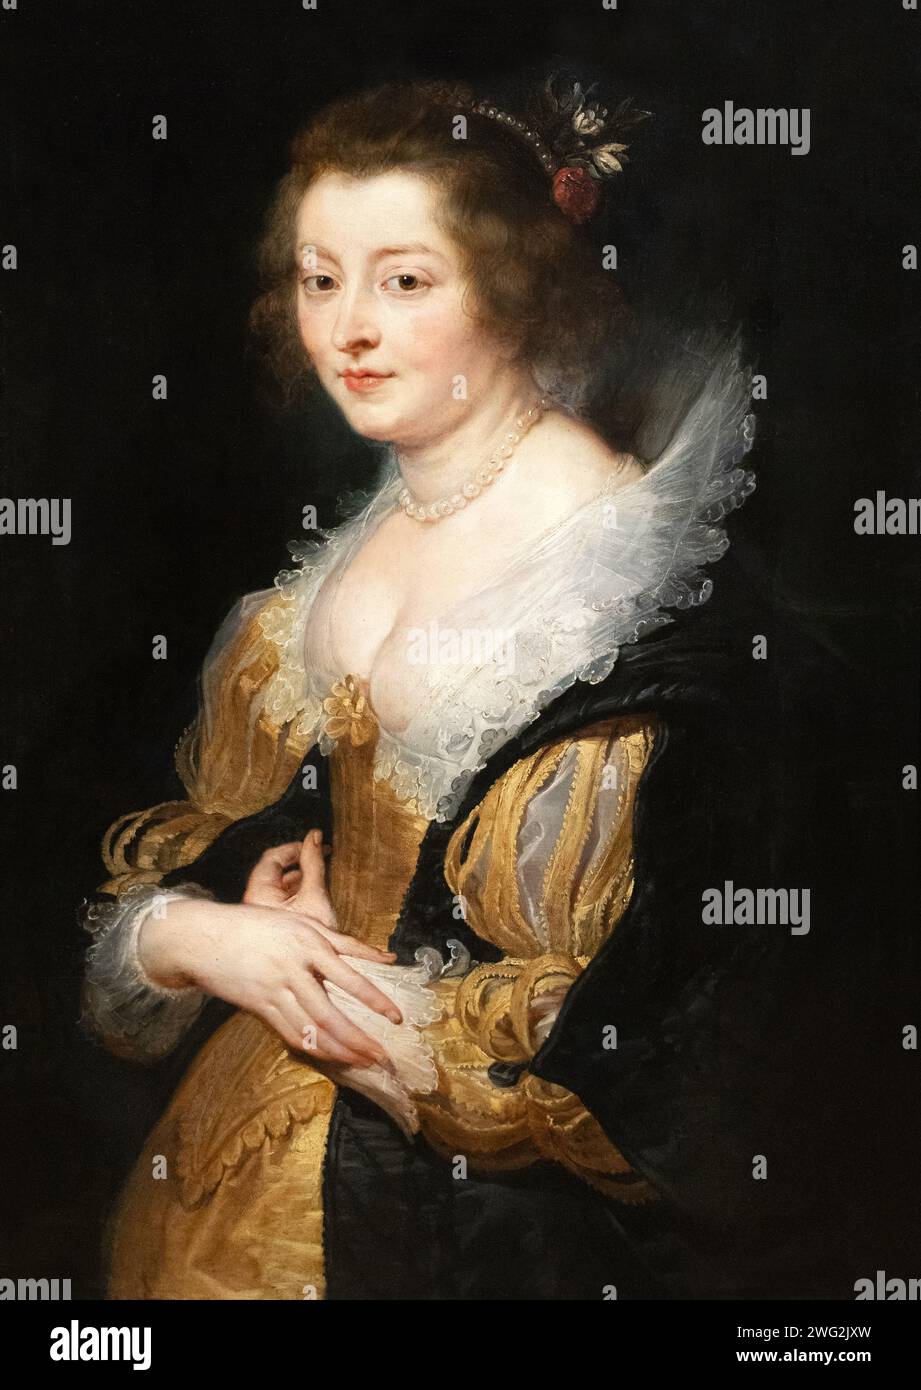 Peter Paul Rubens painting, 'Portrait of a Woman', c.1625-30, oil on panel; Possibly Elizabeth Fourmont, his sister-in-law. 17th century portrait. Stock Photo